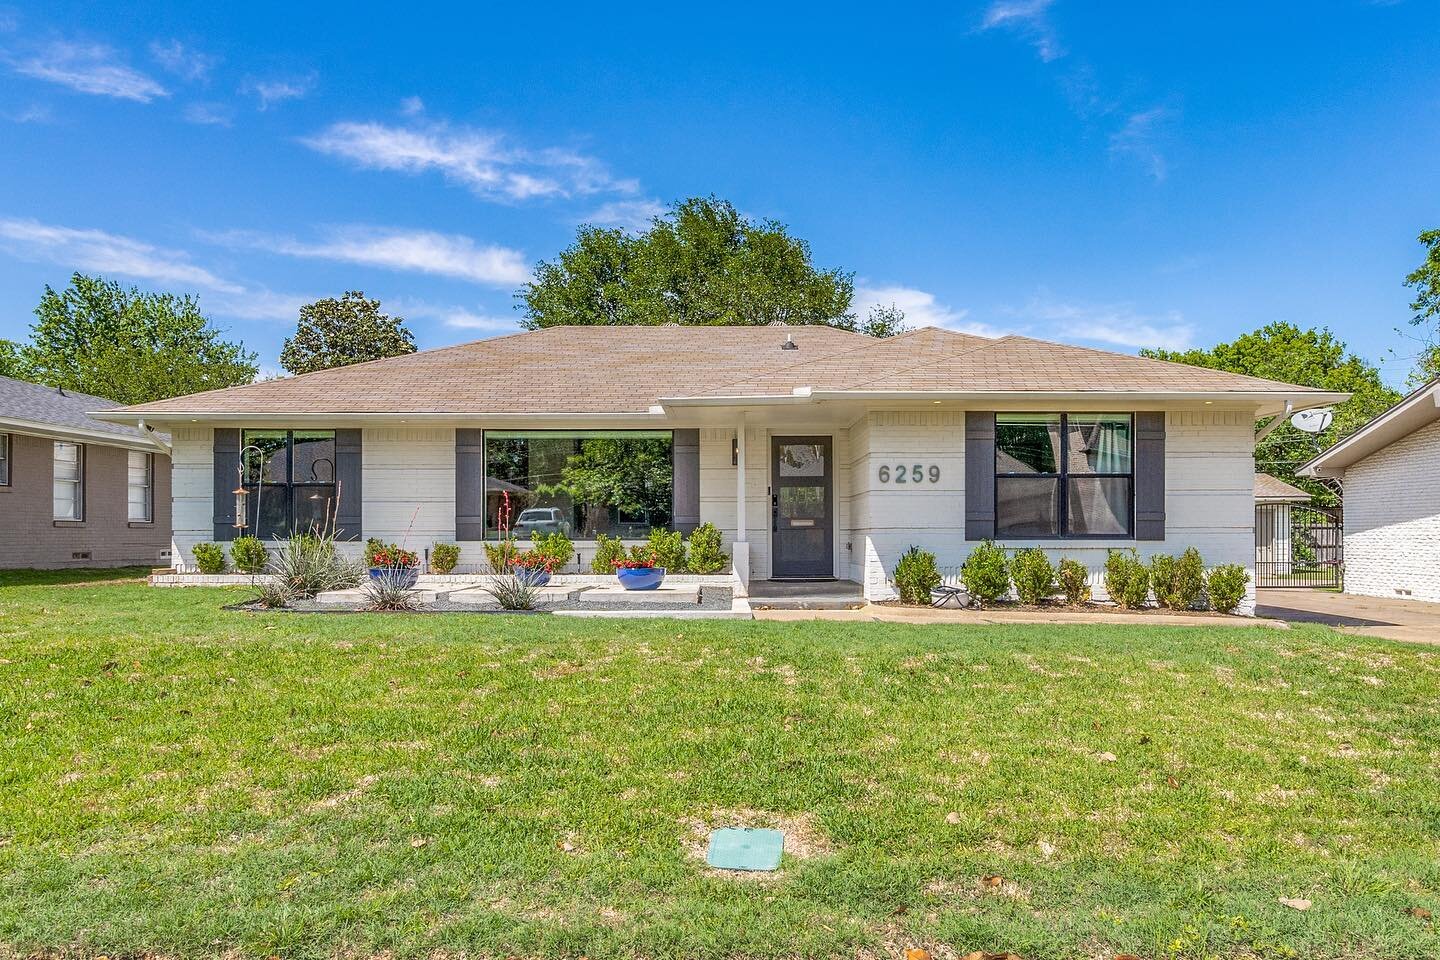 This new Dallas listing is on the market for under $1M

A gem opportunity in Northwood Estates for discerning buyers looking for 3/2 and attached garage with large grassy backyard. Modern kitchen with tons of storage, stylish bar in formal, open floo